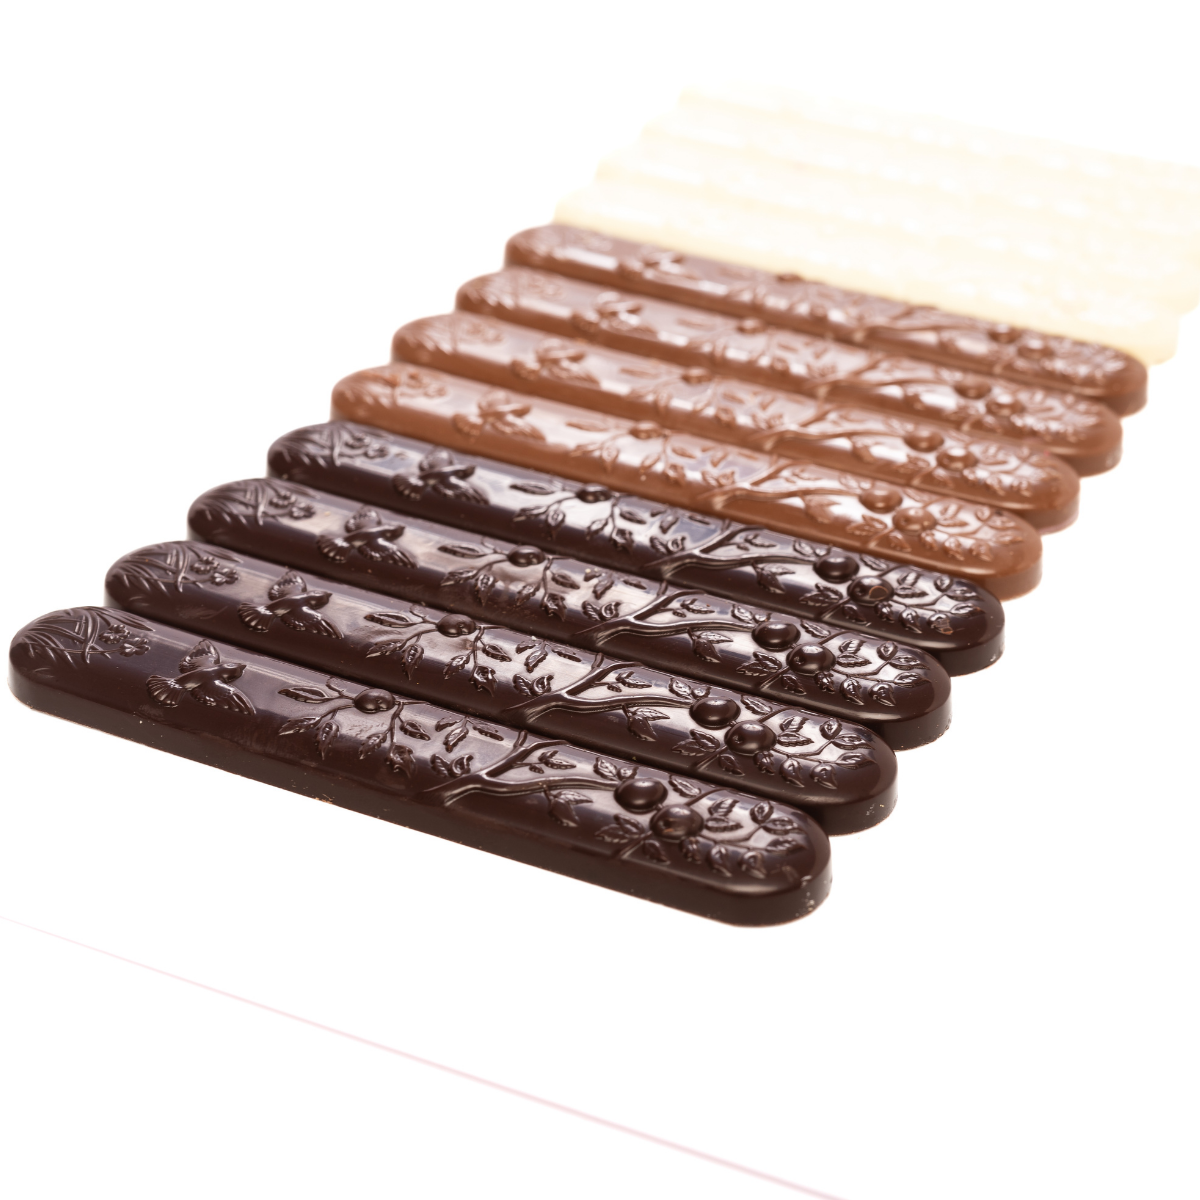 Ombre Chocolates Thins